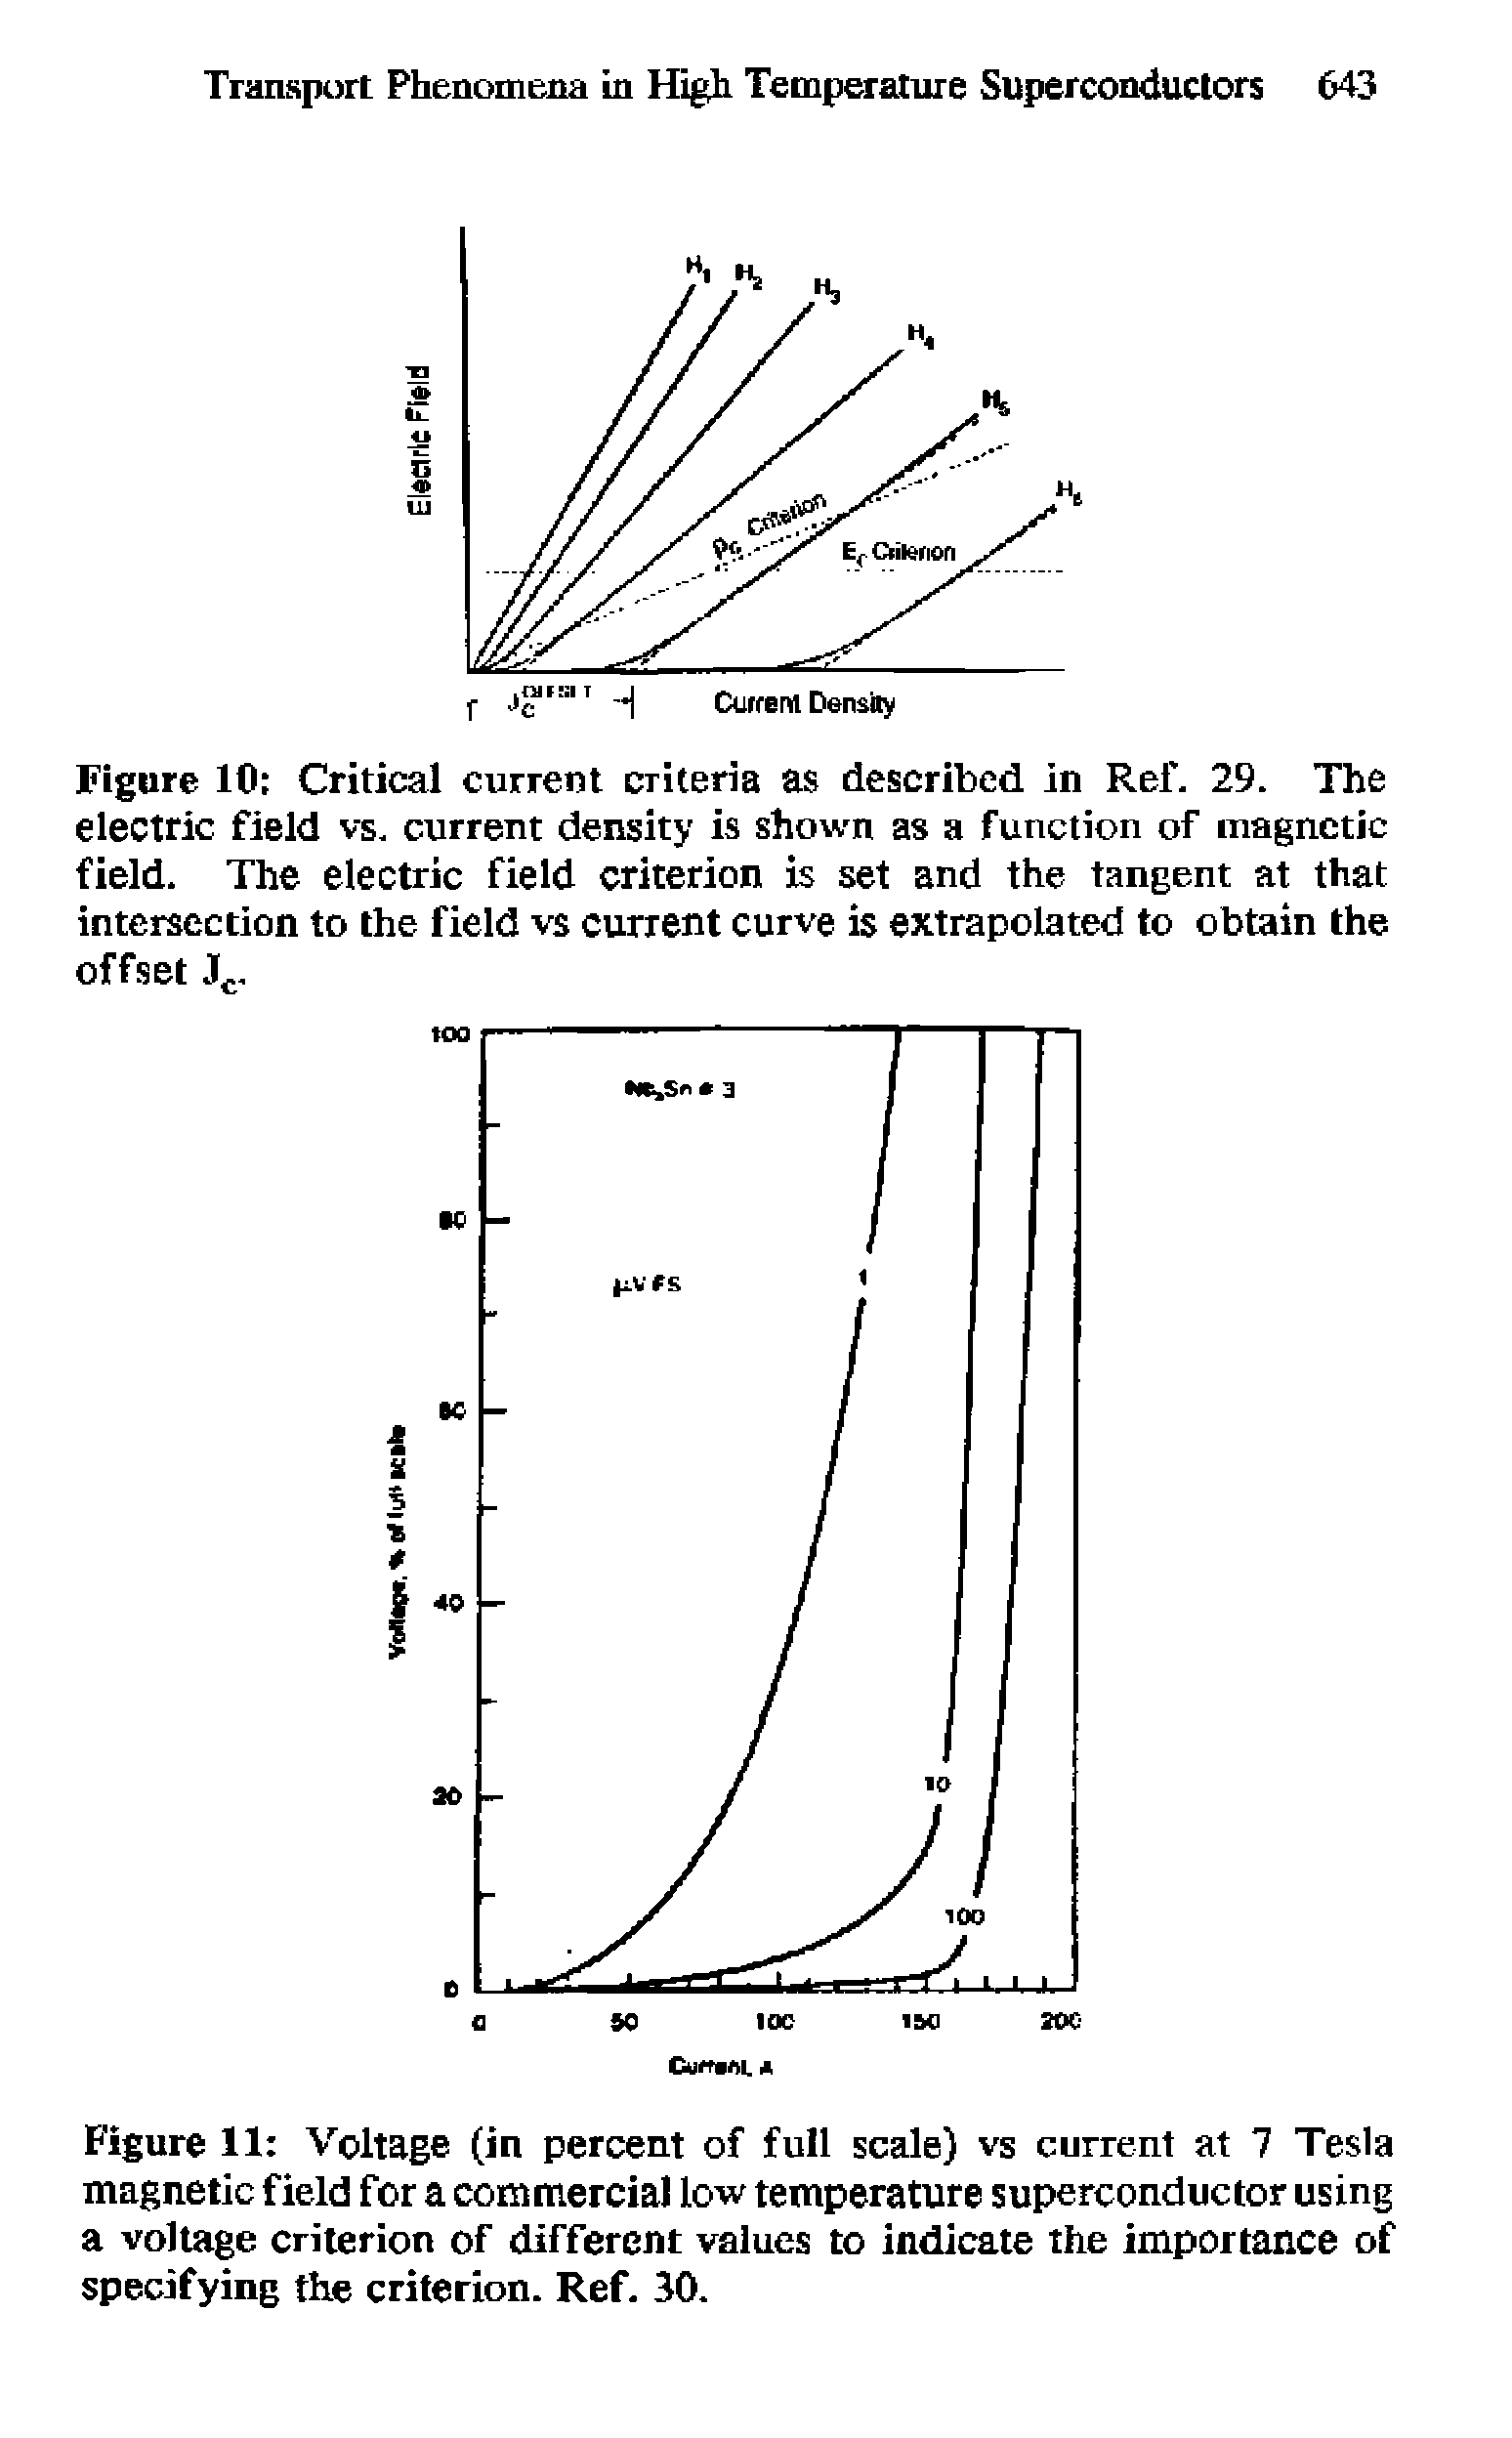 Figure 11 Voltage (in percent of full scale) vs current at 7 Tesla magnetic field for a commercial low temperature superconductor using a voltage criterion of different values to indicate the importance of specifying the criterion. Ref. 30.